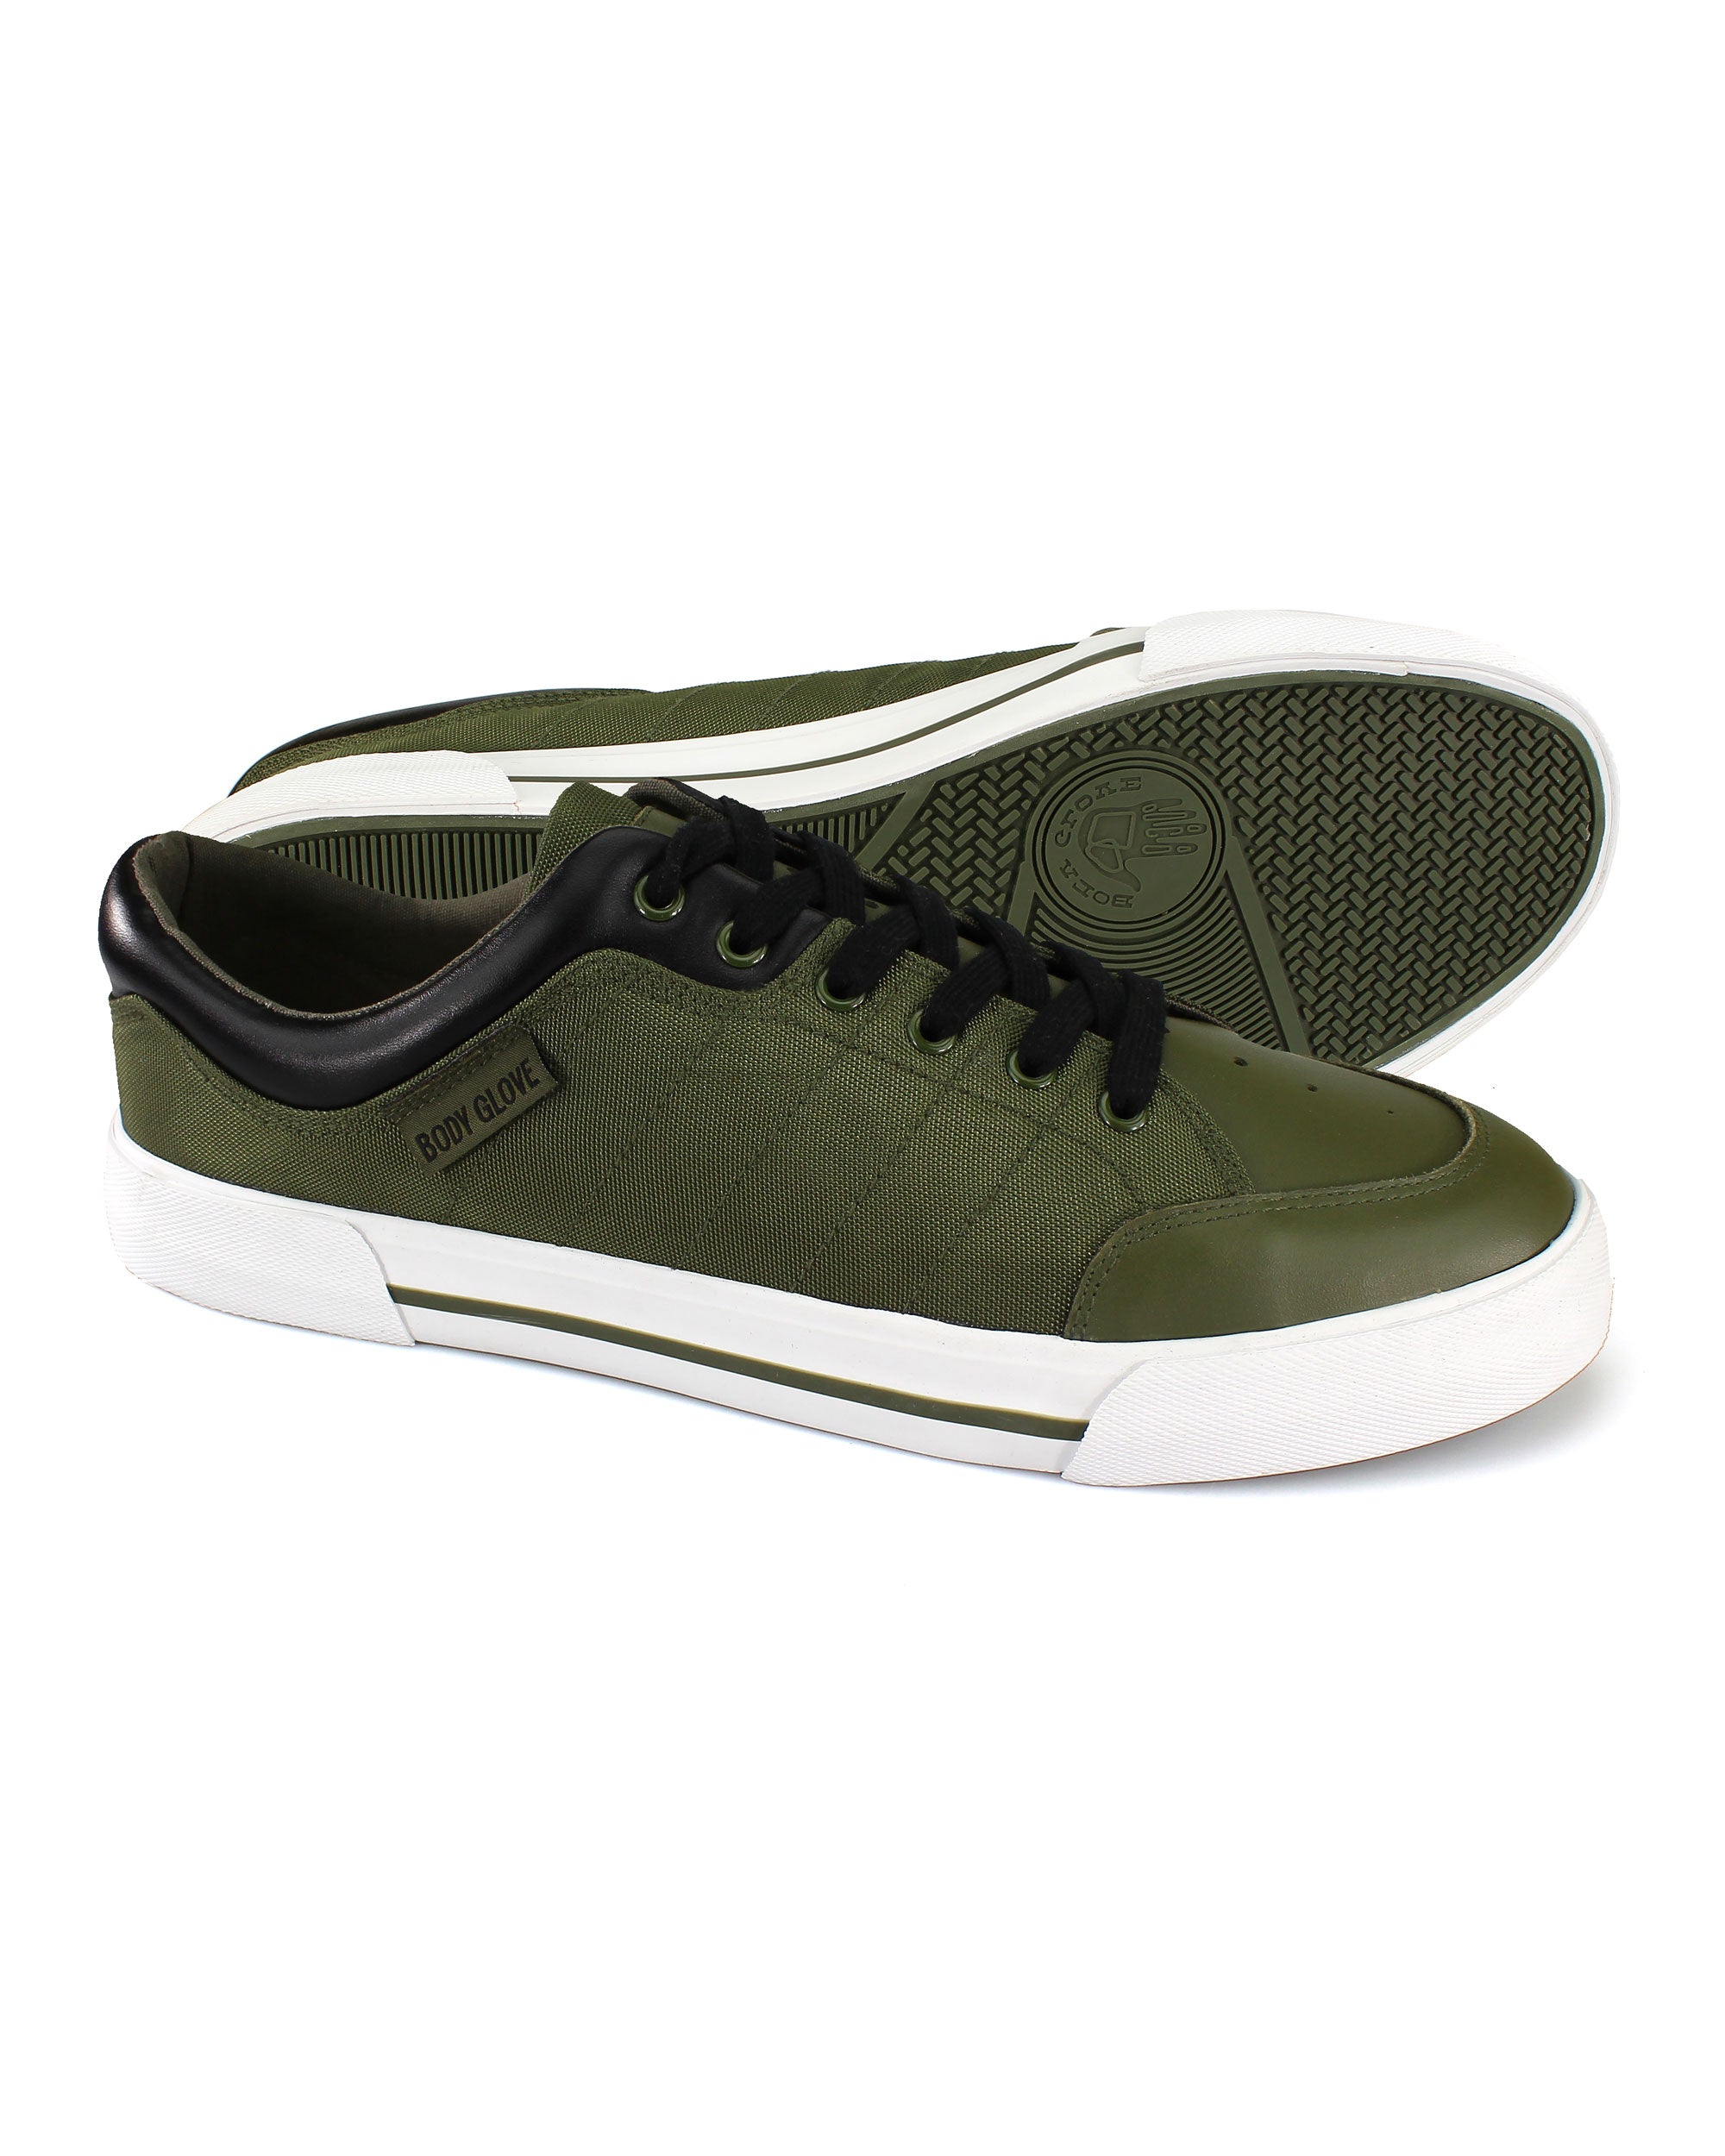 Molokai Lace-up with Vulcanized Sole 